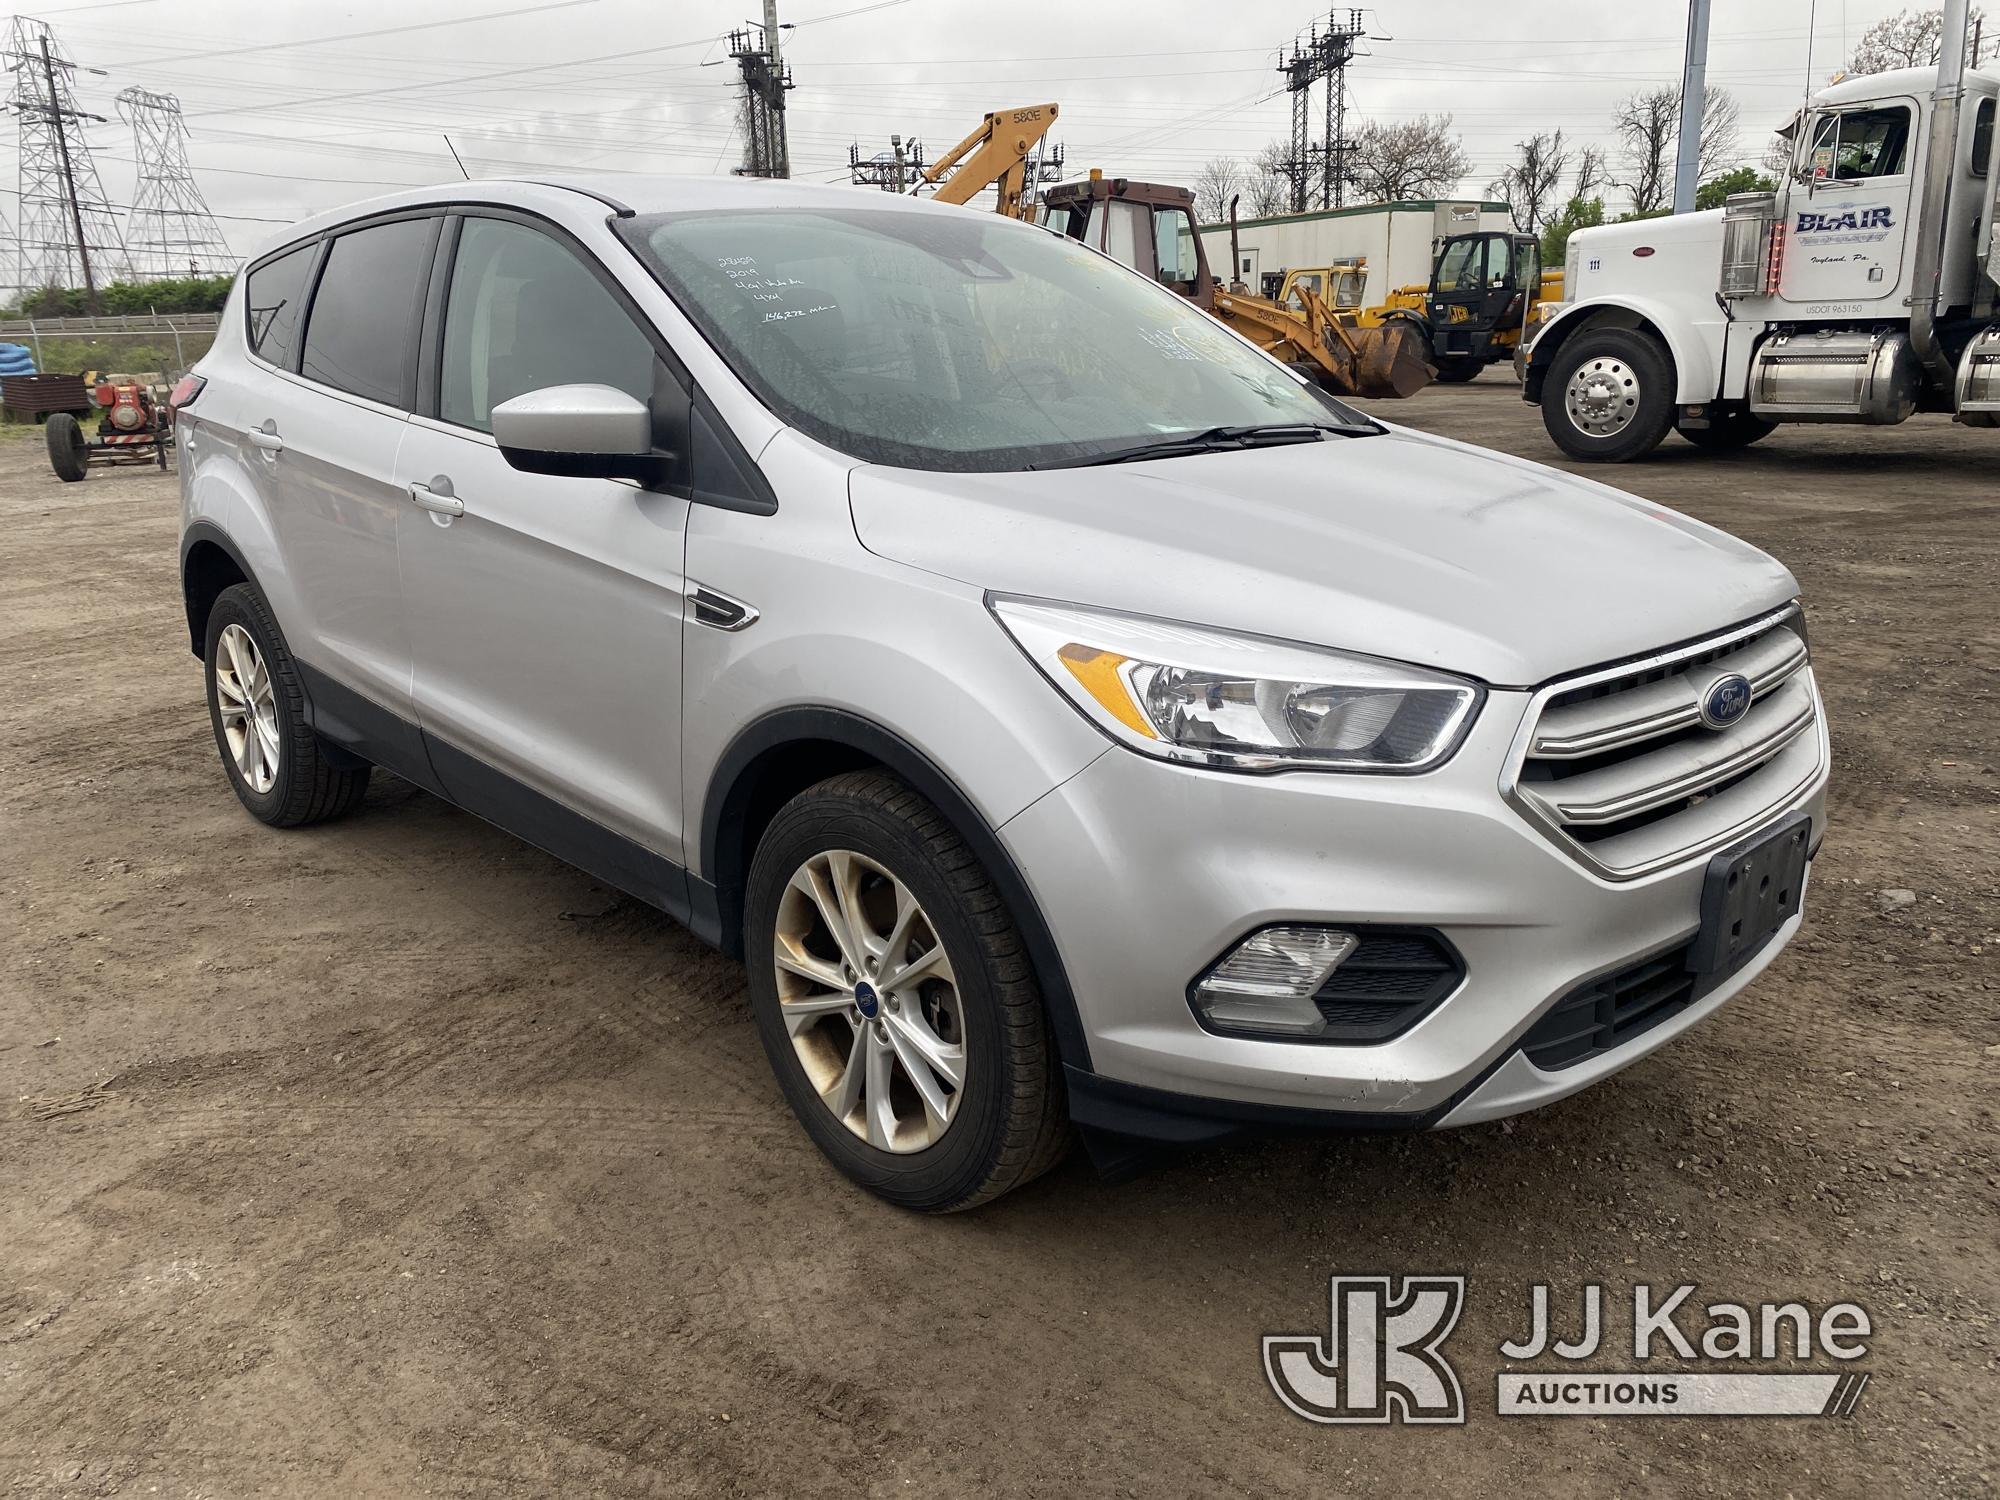 (Plymouth Meeting, PA) 2019 Ford Escape 4x4 4-Door Sport Utility Vehicle Runs & Moves, Body & Rust D